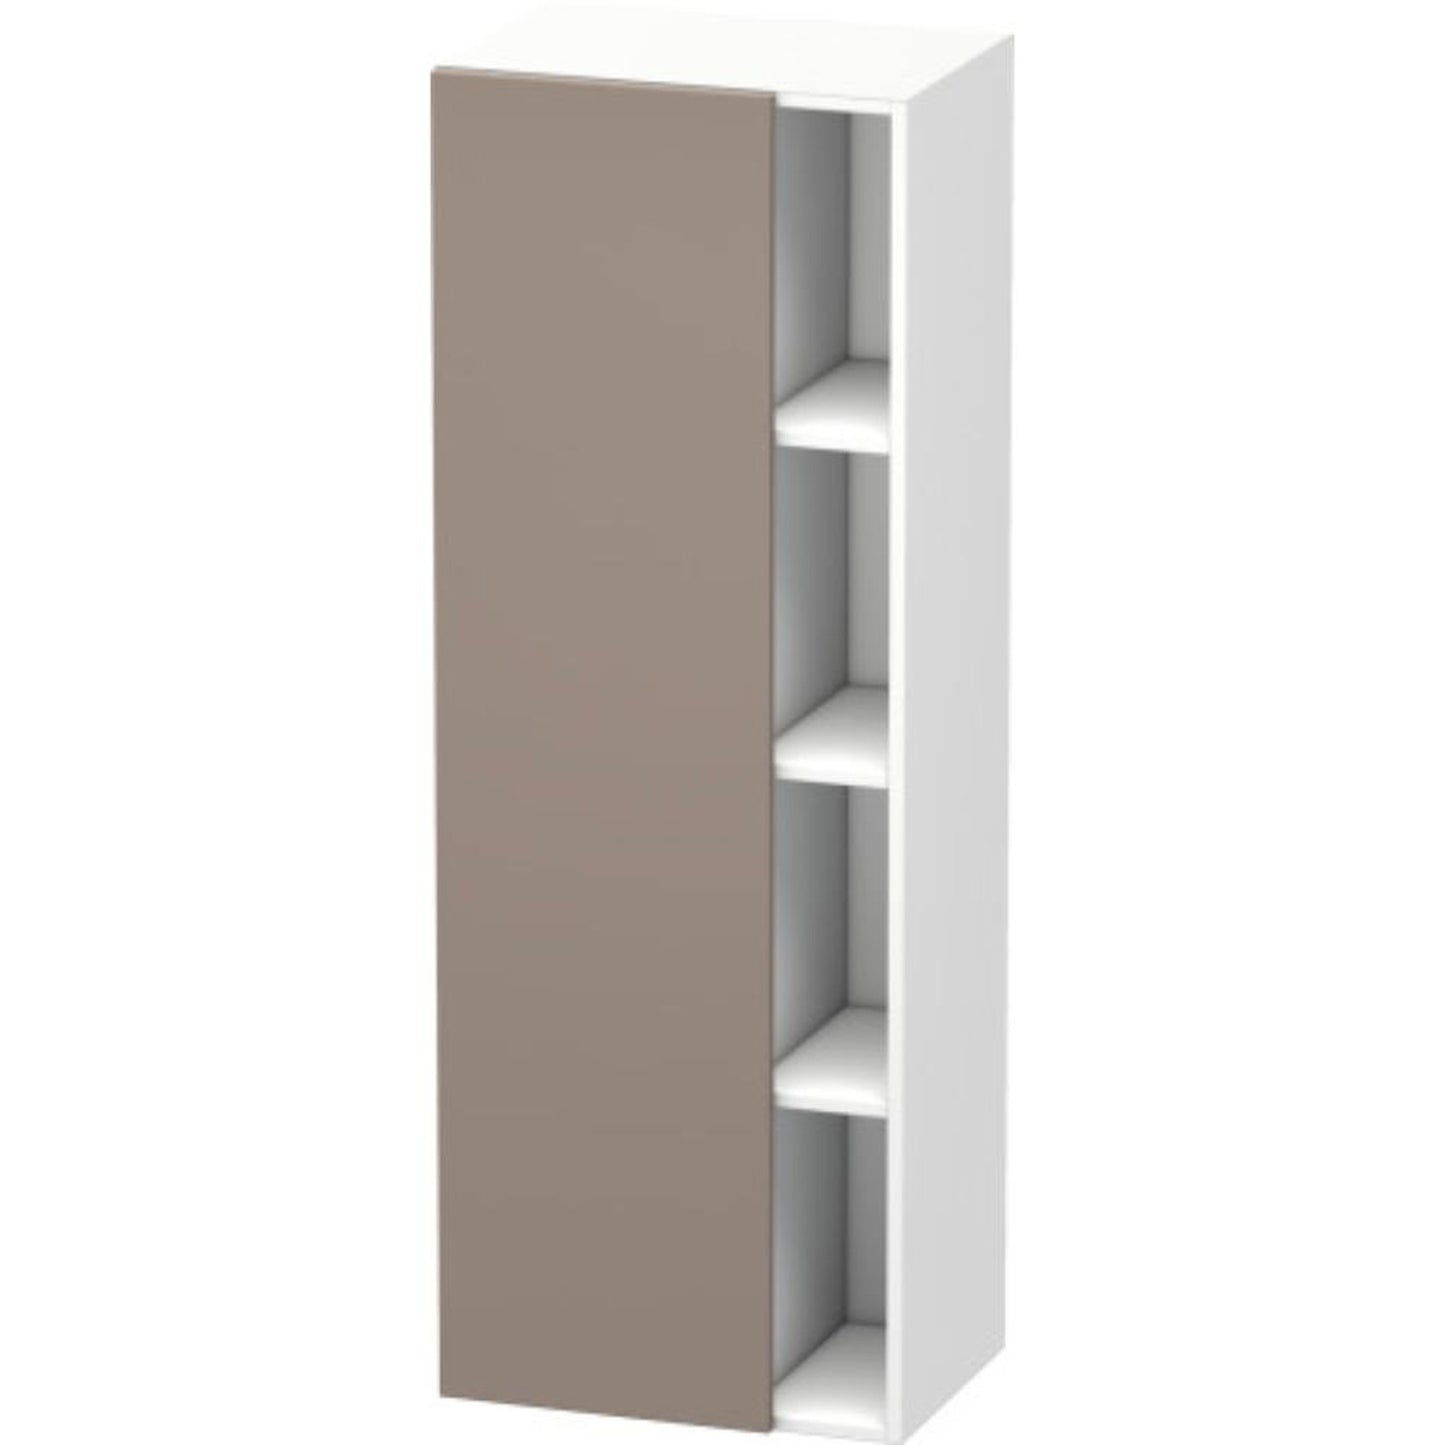 Duravit DuraStyle 20" x 55" x 14" Tall Cabinet With Left Hinge One Door in Basalt and White (DS1239L4318)